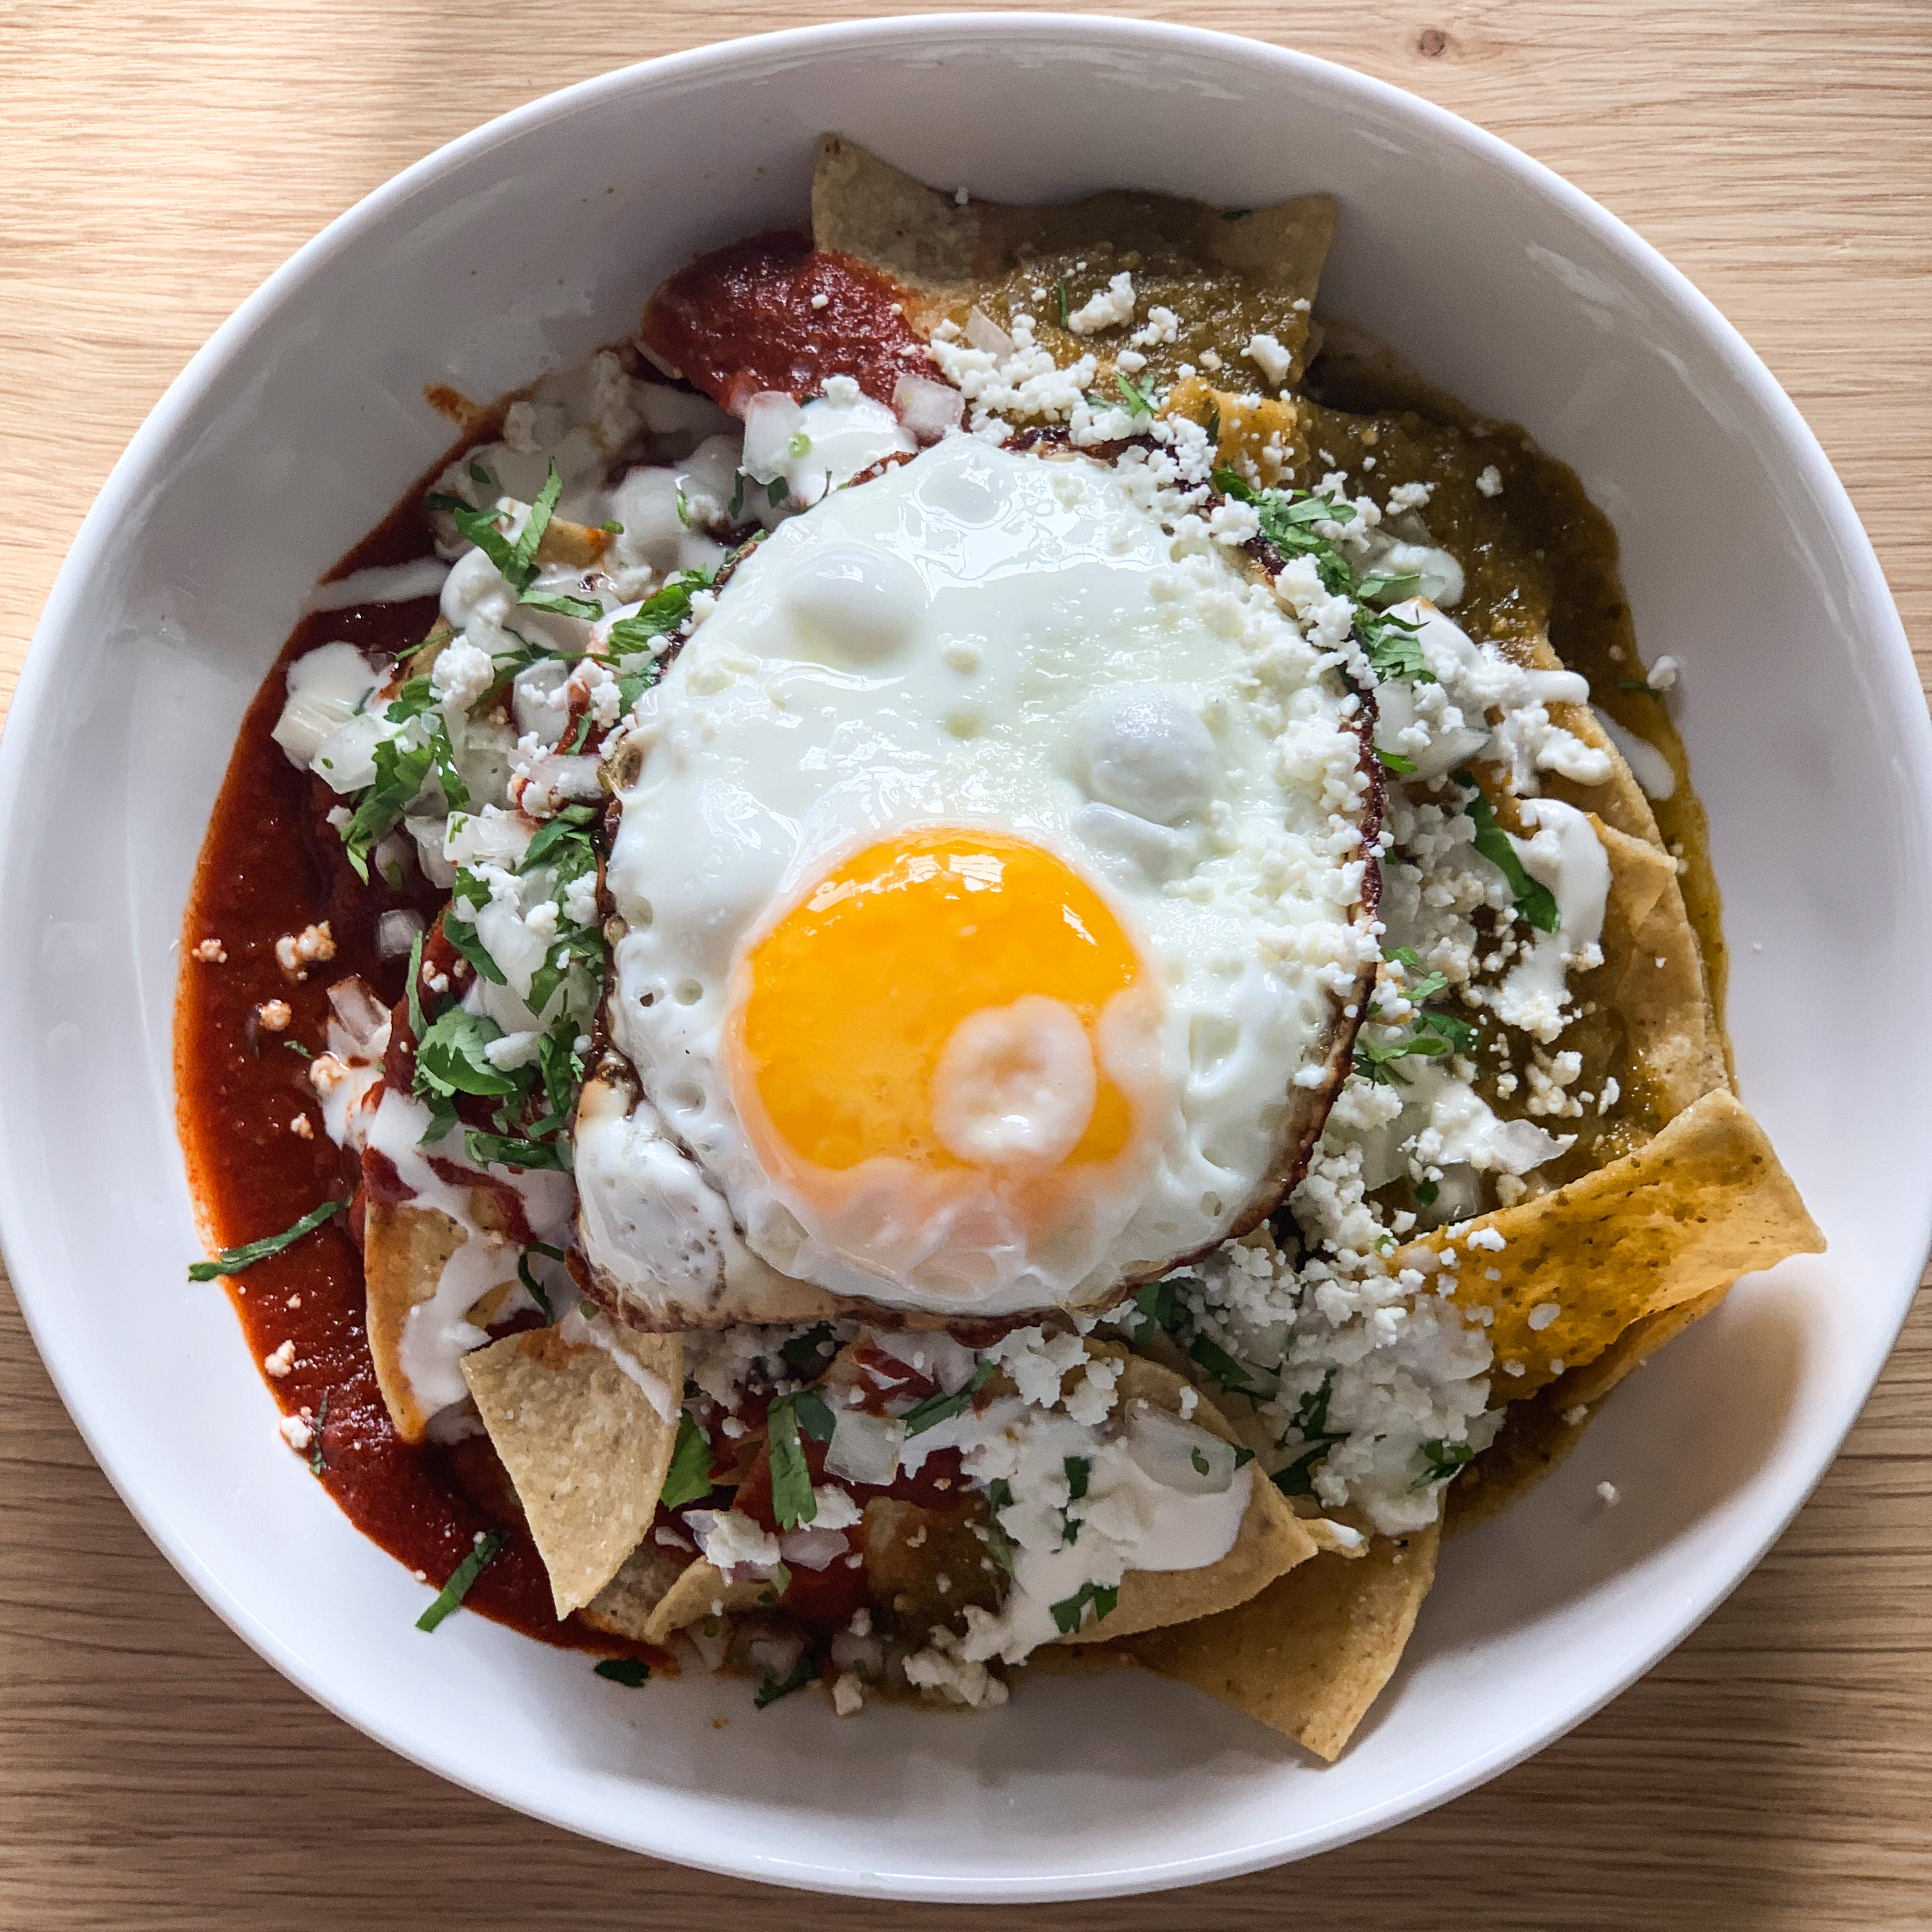 bowl with tortilla chips, cheese, red sauce, and egg